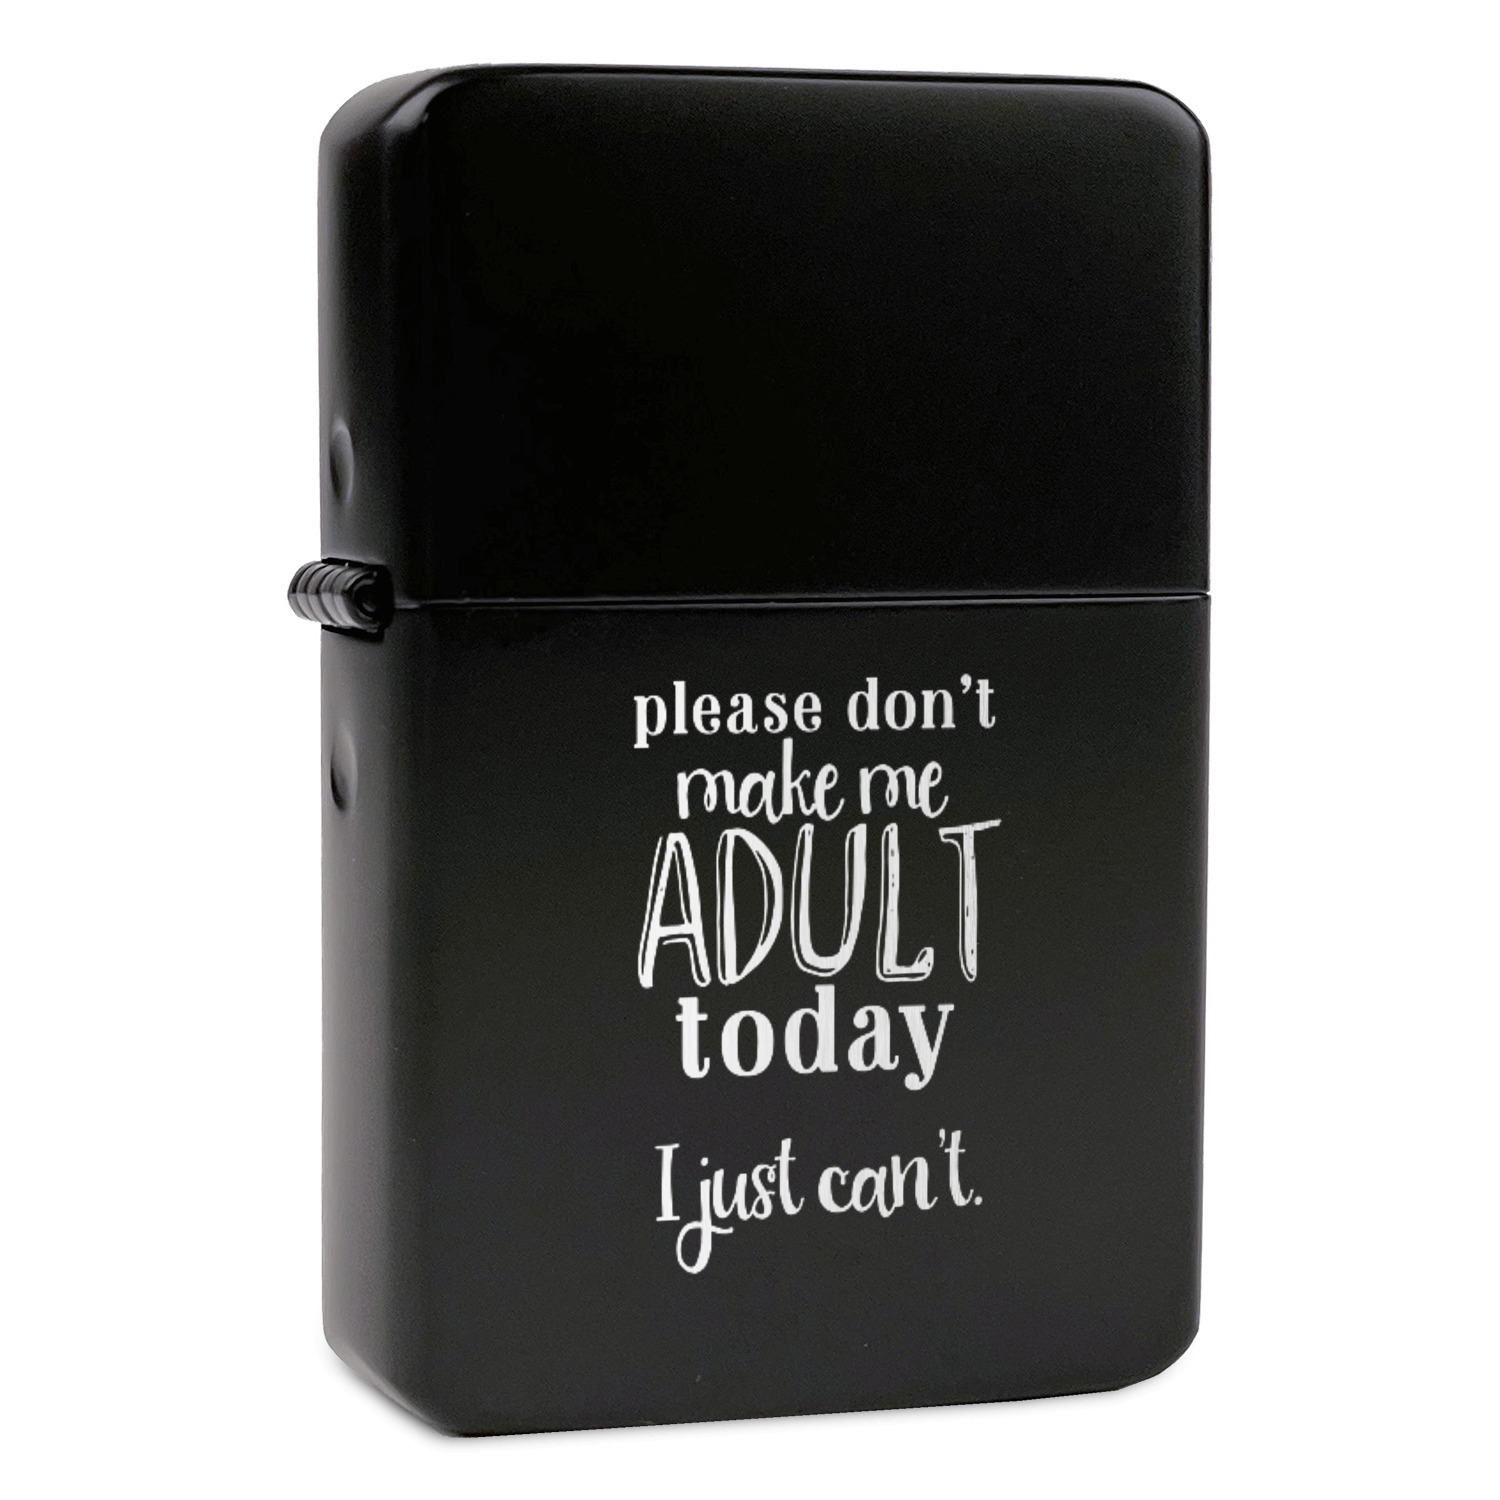 Custom Funny and Sayings Windproof Lighter | YouCustomizeIt